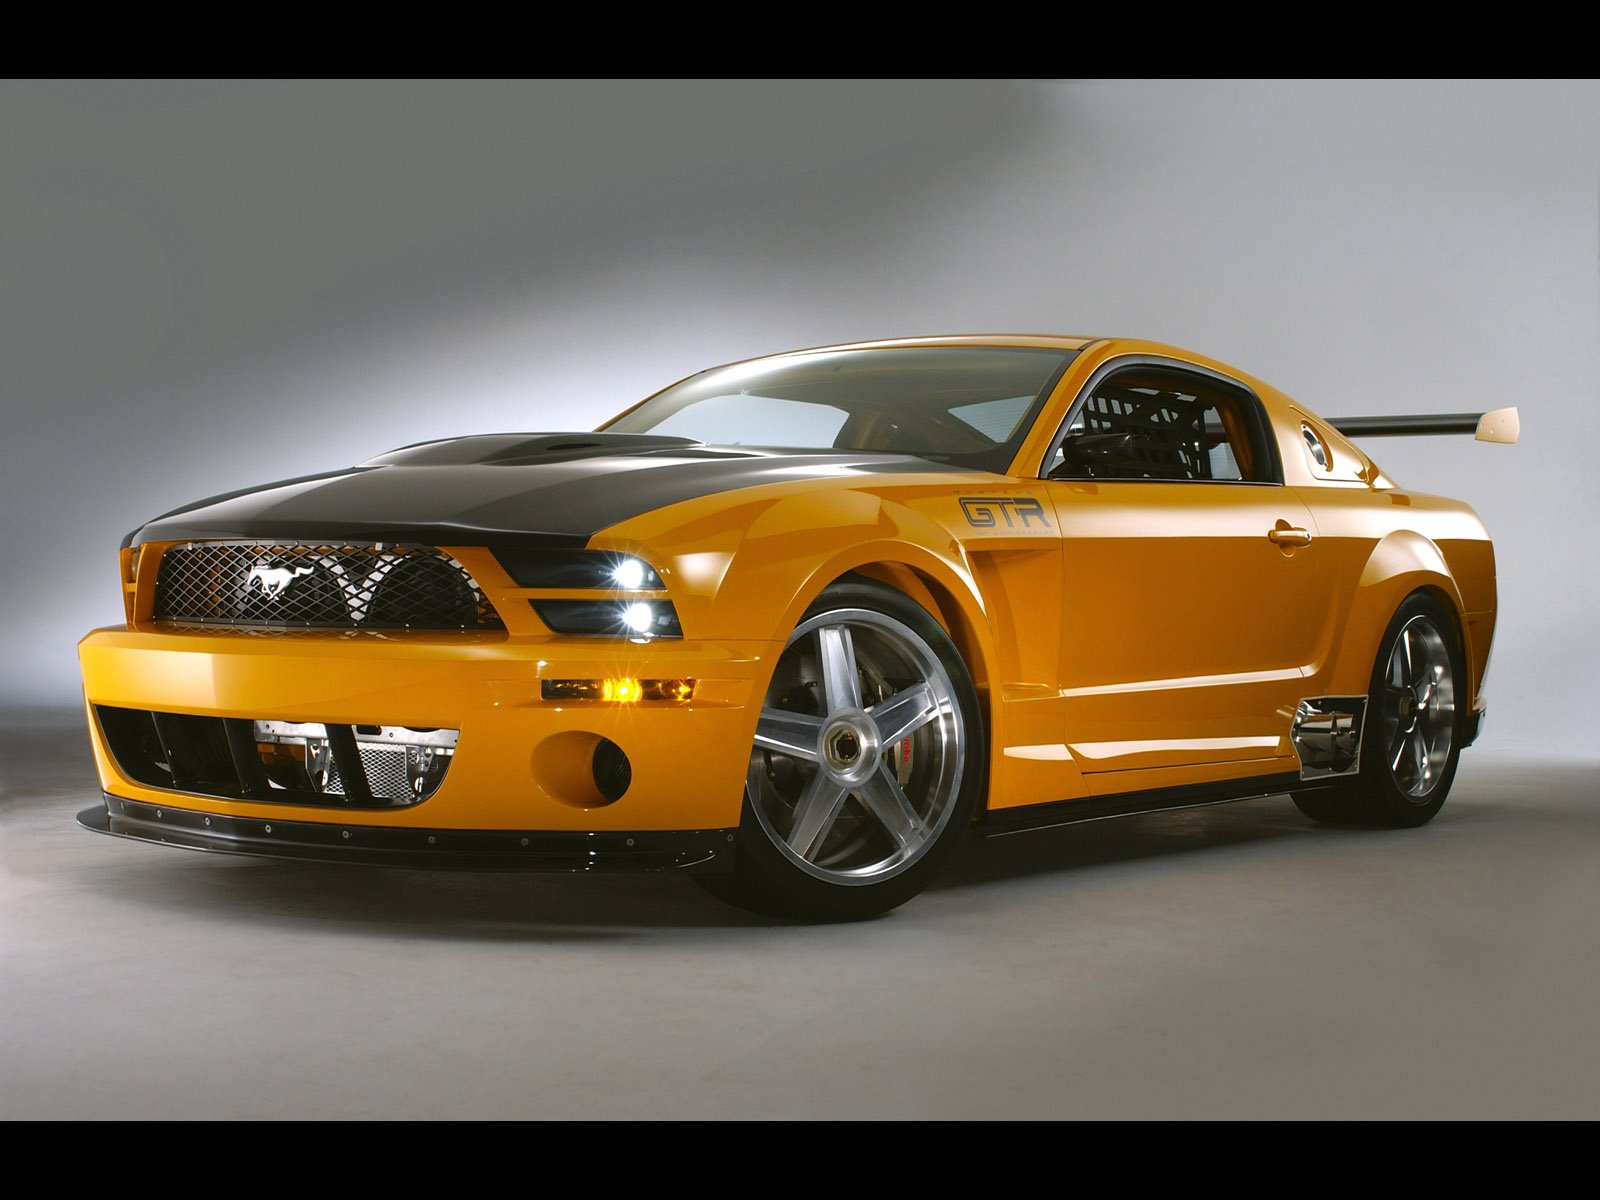 2004, Ford, Mustang, Gt r, Concept, Muscle, Supercar, Supercars, Dl Wallpaper